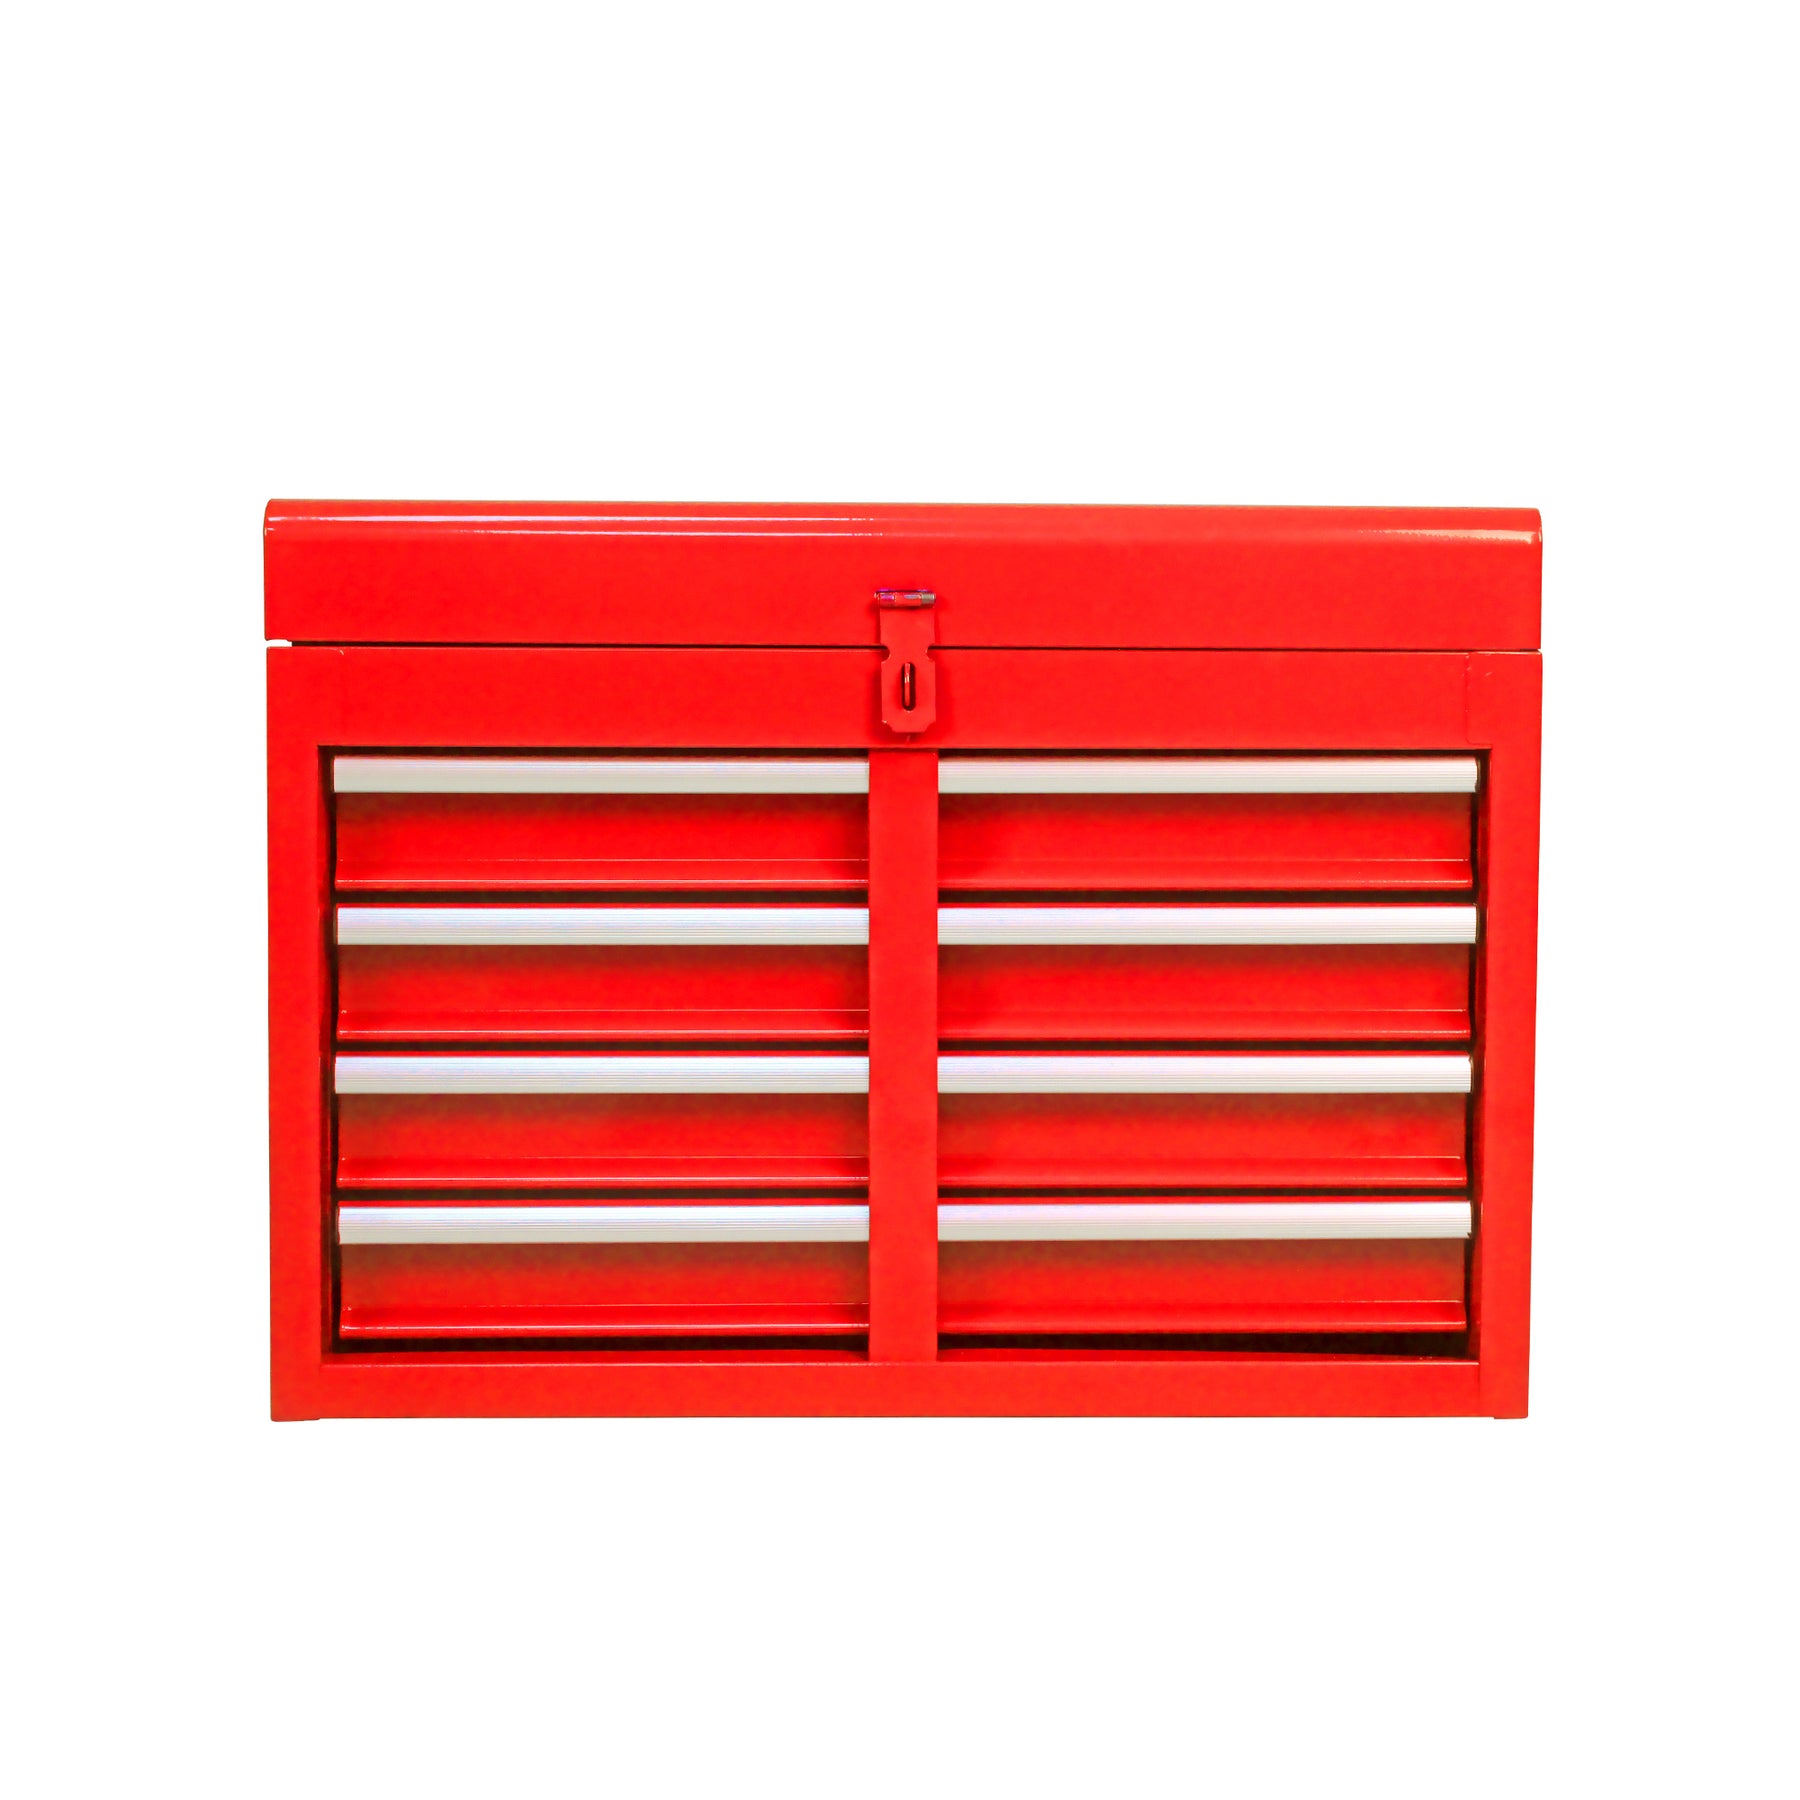 Detachable 5 Drawer Tool Chest with Bottom Cabinet and One Adjustable Shelf--Red - Tonkn